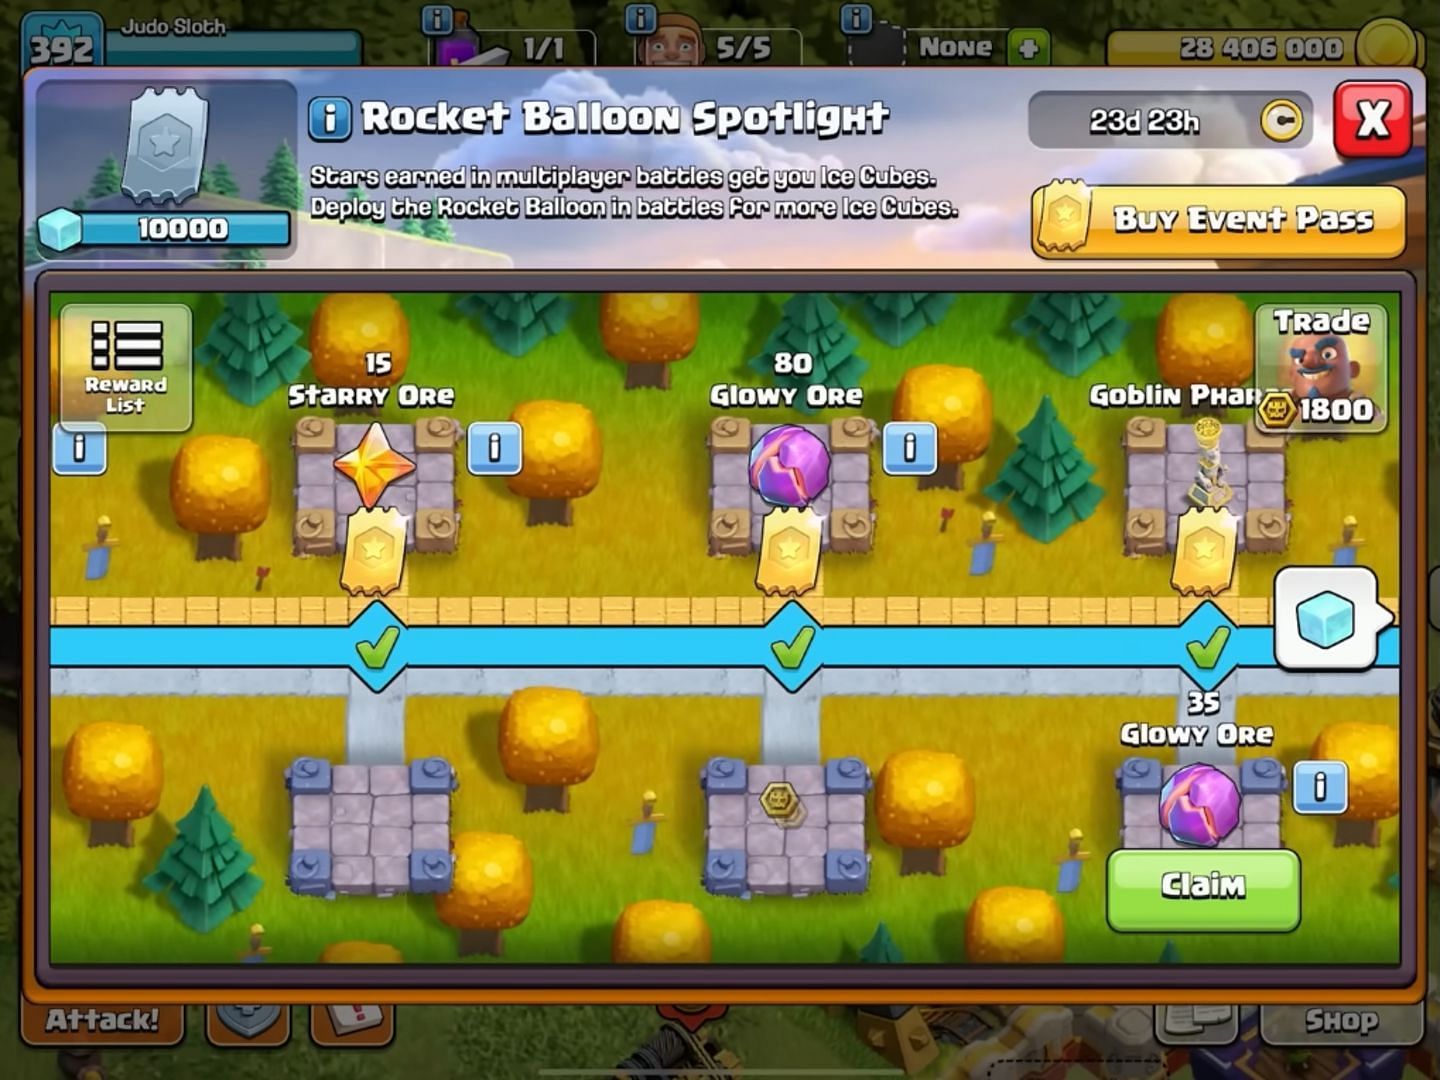 Event Tracker in Clash of Clans Rocket Balloon Spotlight occasion (Image via Supercell)